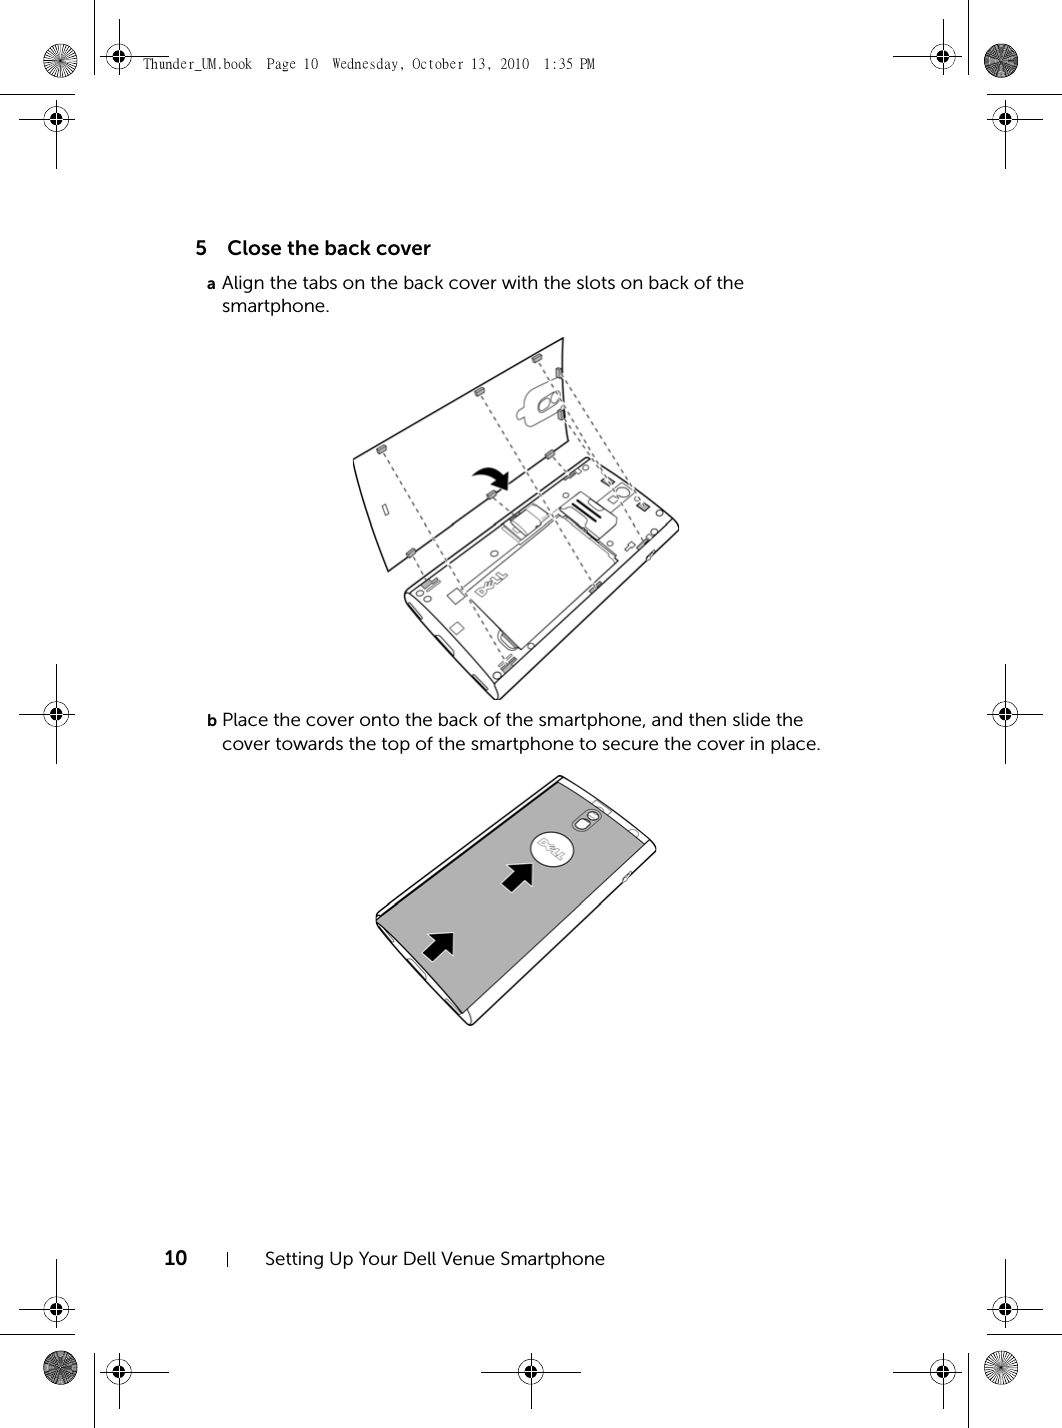 10 Setting Up Your Dell Venue Smartphone5Close the back coveraAlign the tabs on the back cover with the slots on back of the smartphone.bPlace the cover onto the back of the smartphone, and then slide the cover towards the top of the smartphone to secure the cover in place.Thunder_UM.book  Page 10  Wednesday, October 13, 2010  1:35 PM